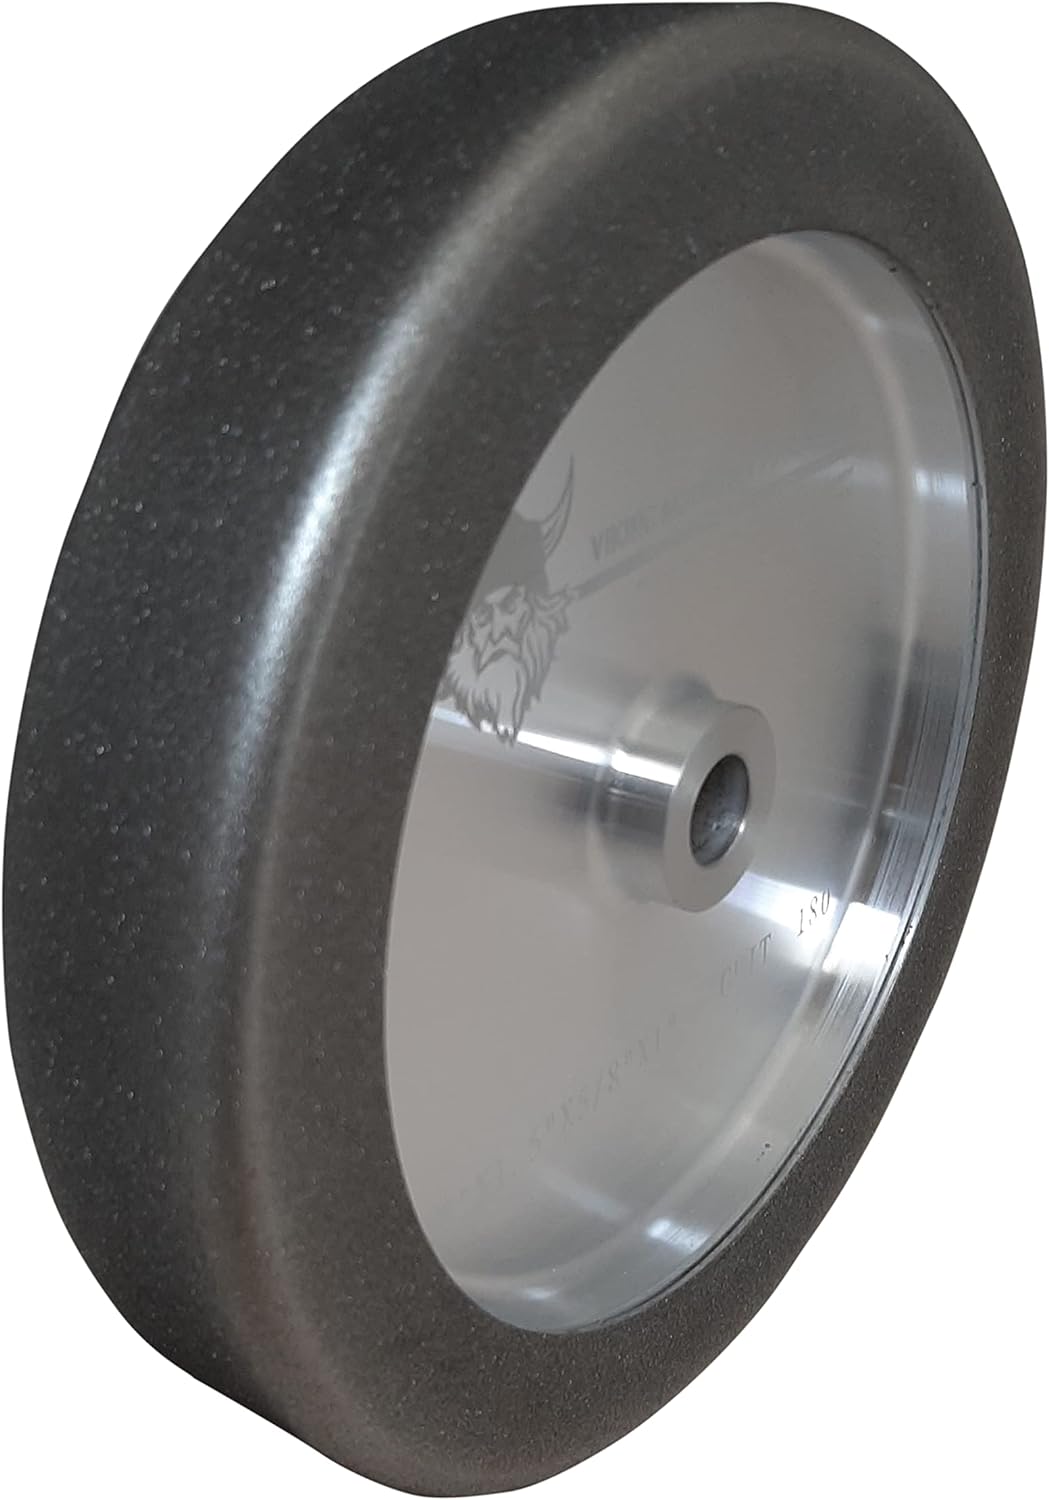 VMTW Precision Made Solid Aluminum body 180 grit 8 inch diameter by 1.5 inch wide with CBN on the face and 1 Inch of CBN on each side. Corners 1/4R. For 5/8 inch shaft.